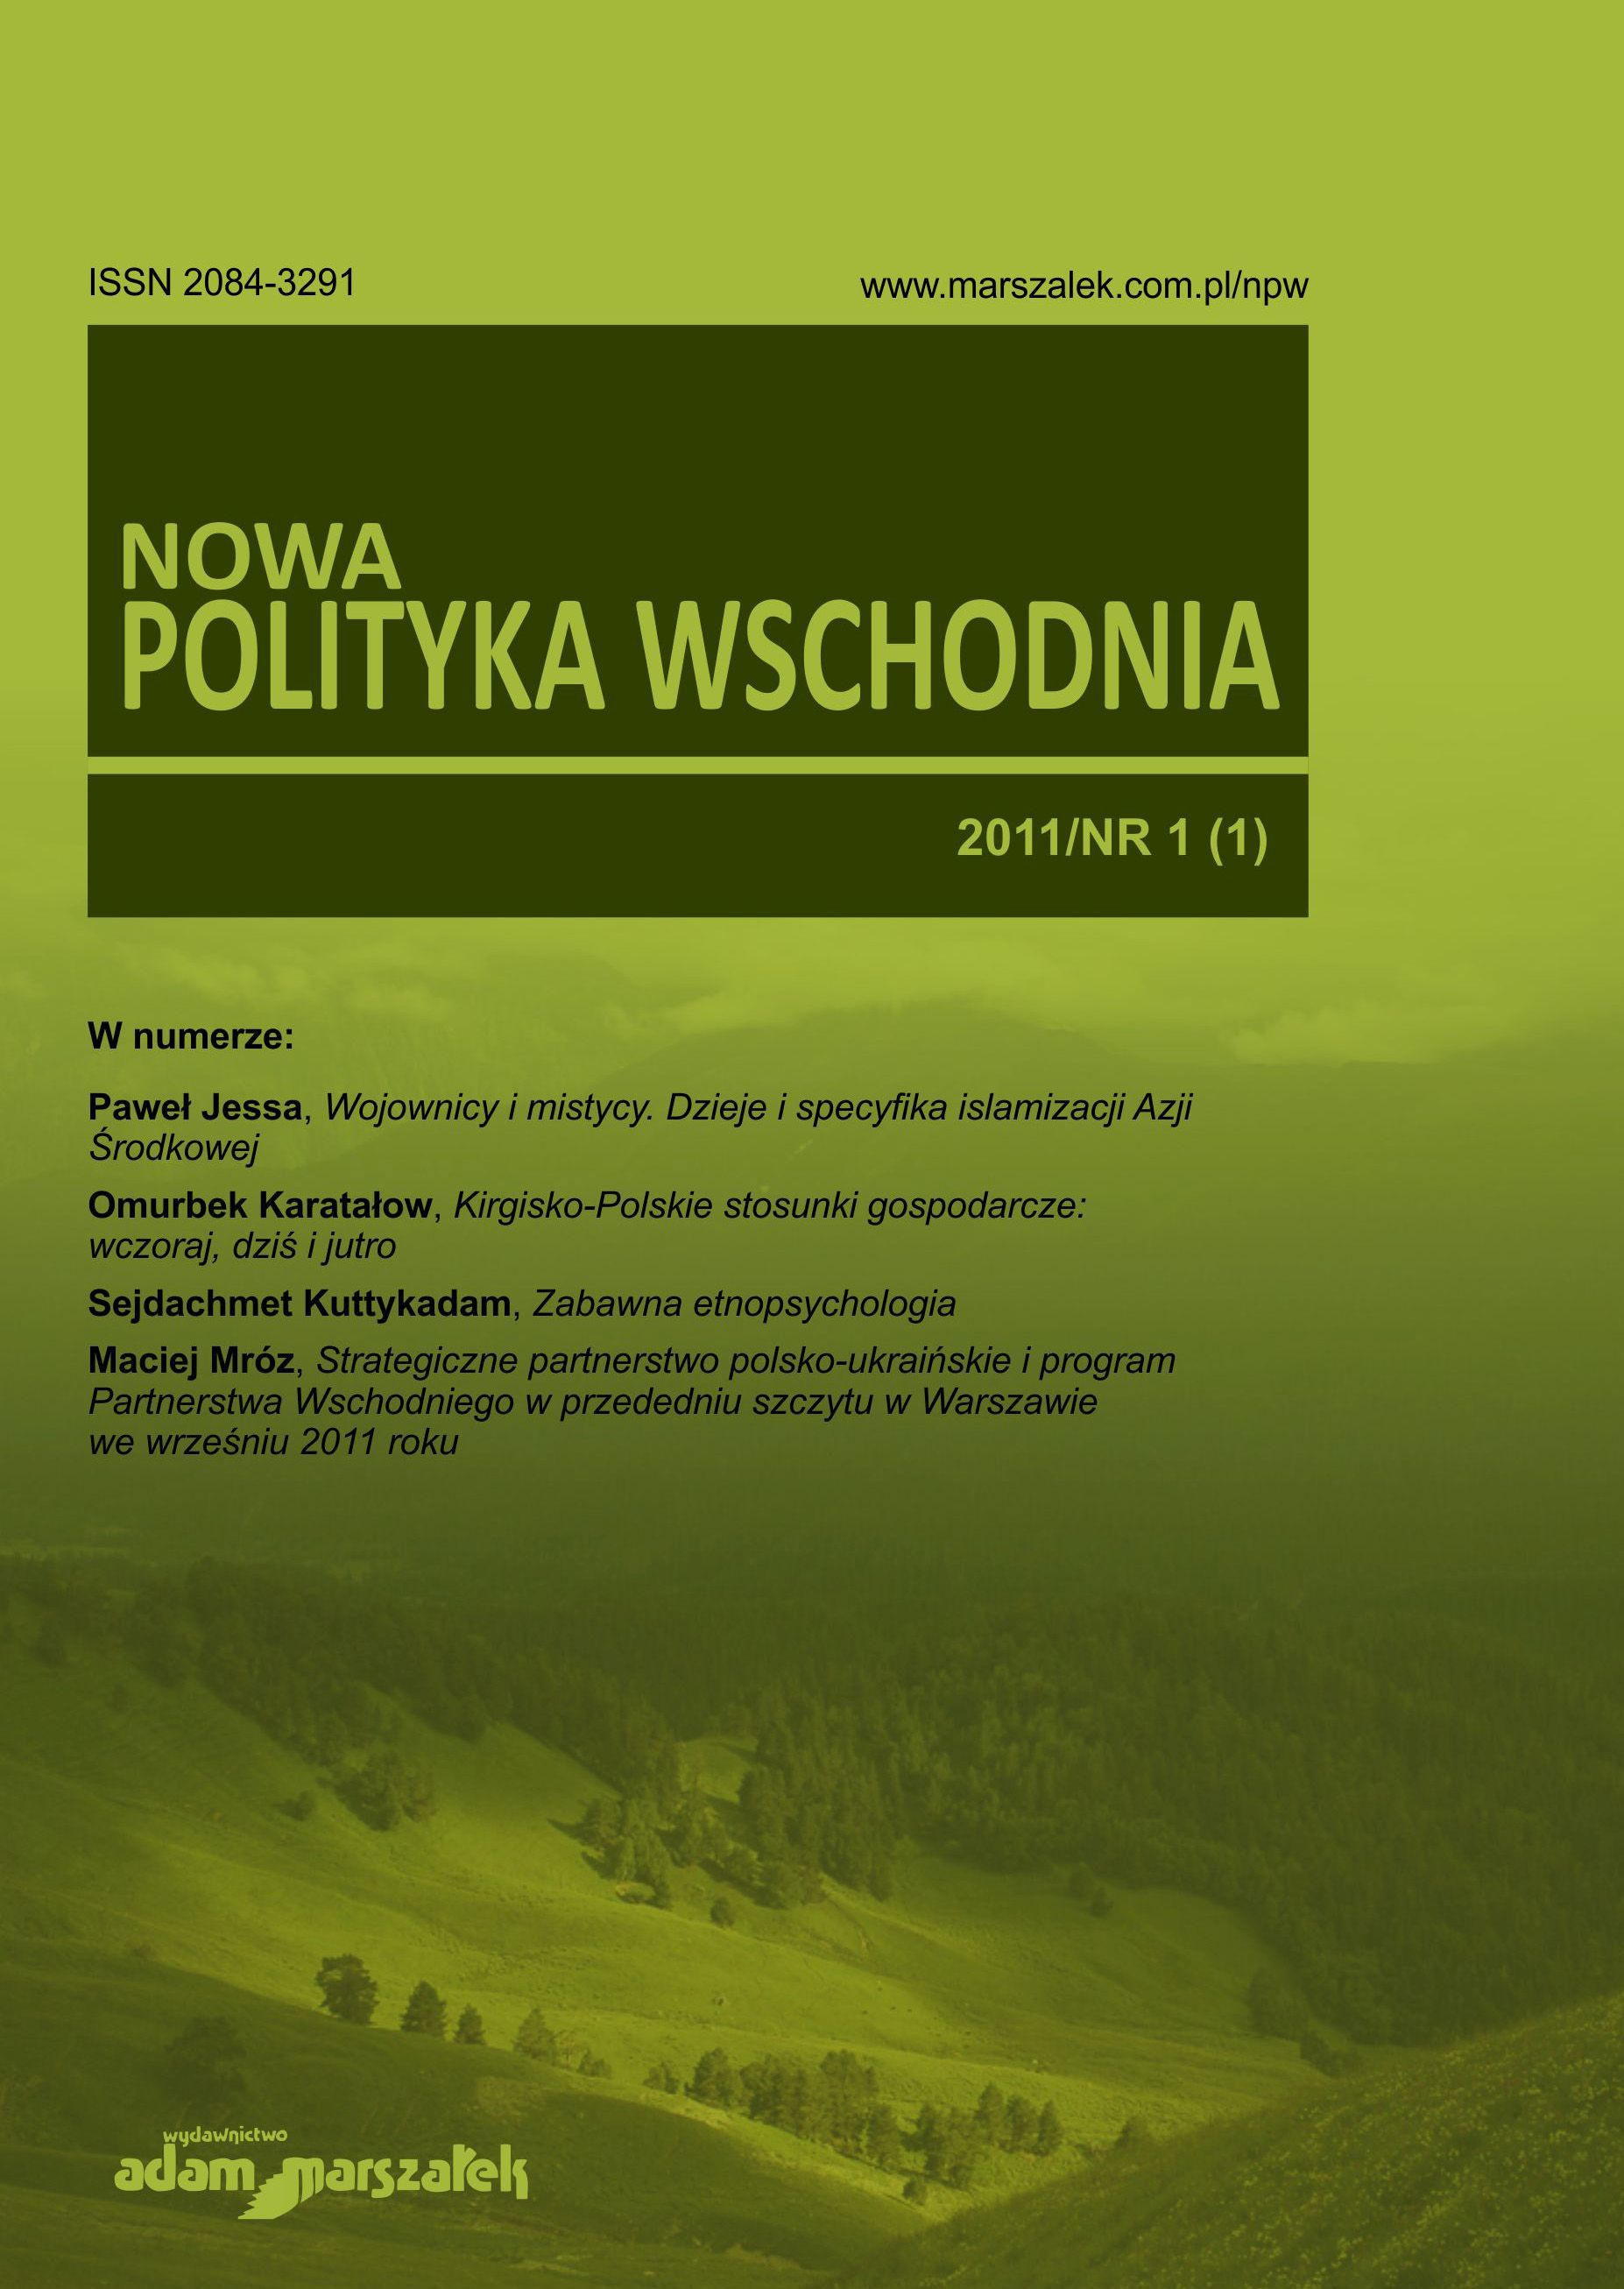 Strategic Partnership and the Polish-Ukrainian Program
on the Eve of the Eastern Partnership Summit in Warsaw in September 2011 Cover Image